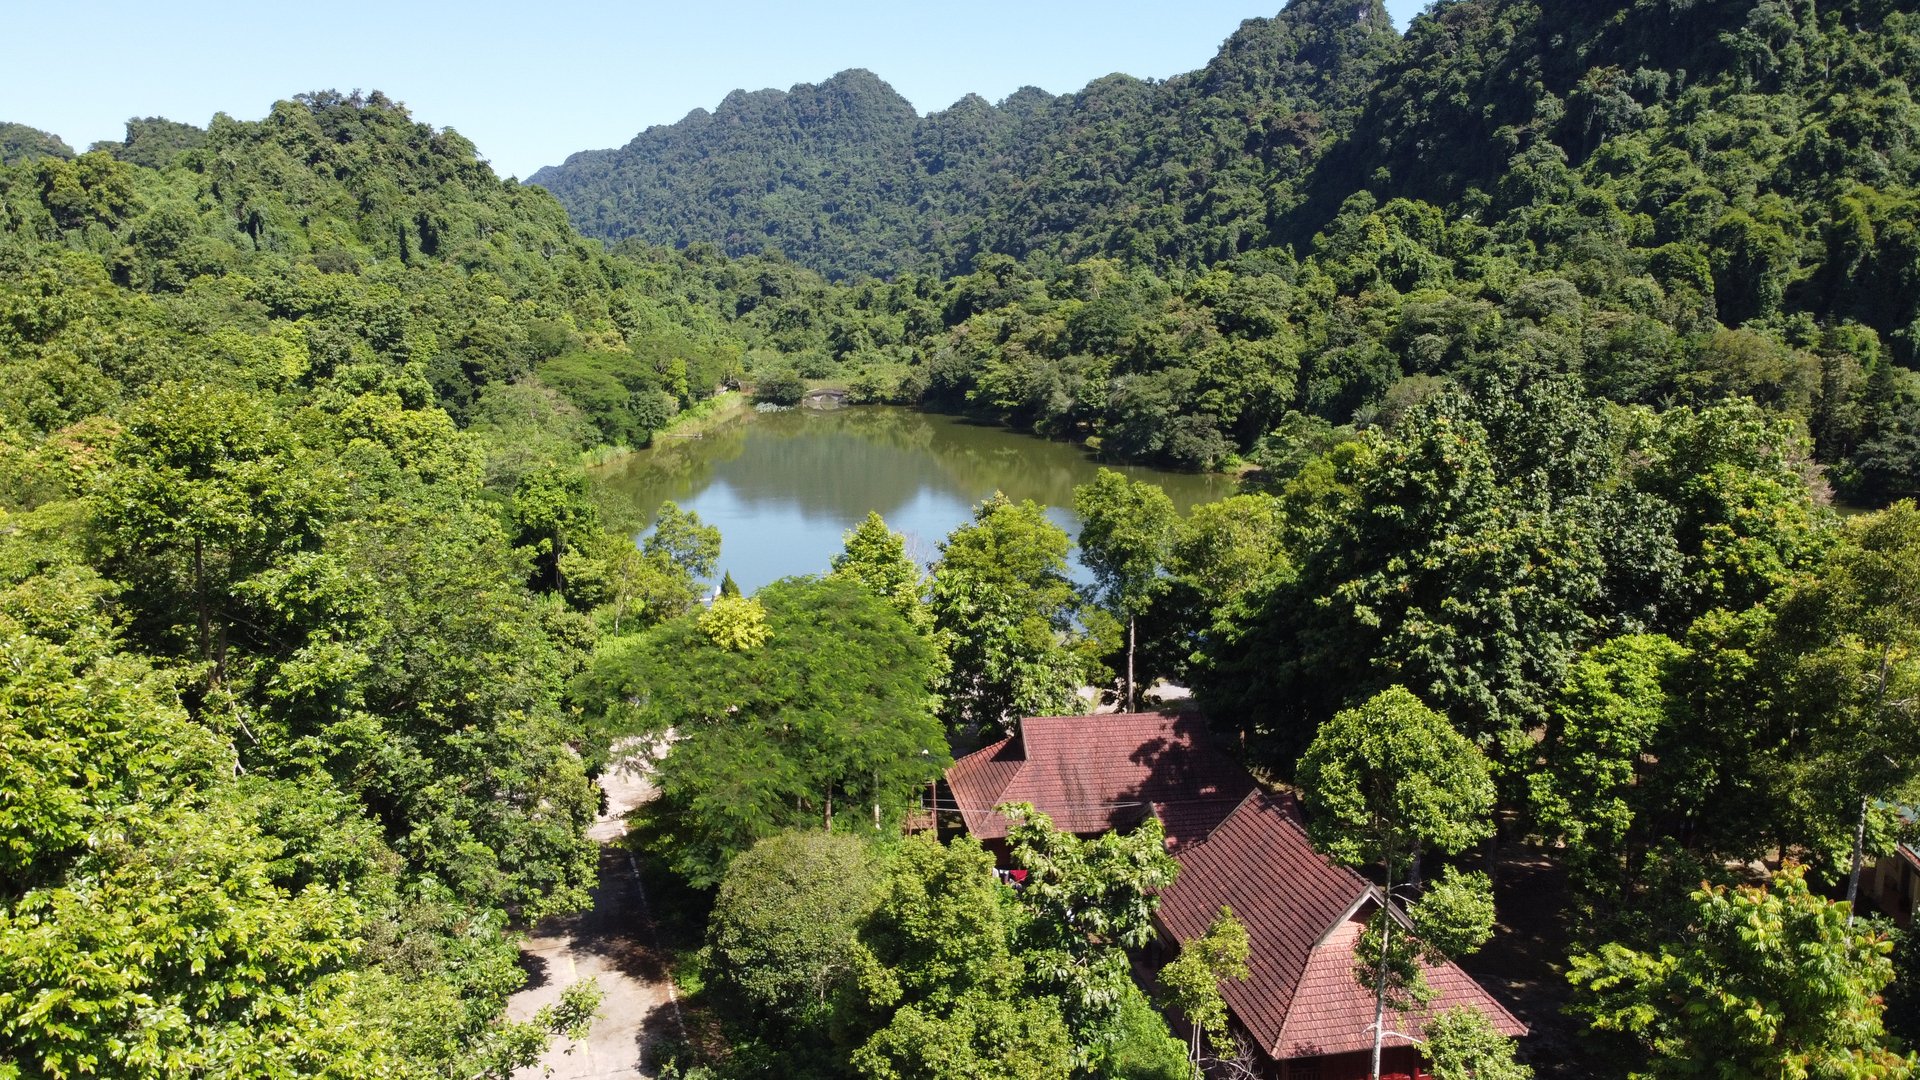 A view of Cuc Phuong National Park.